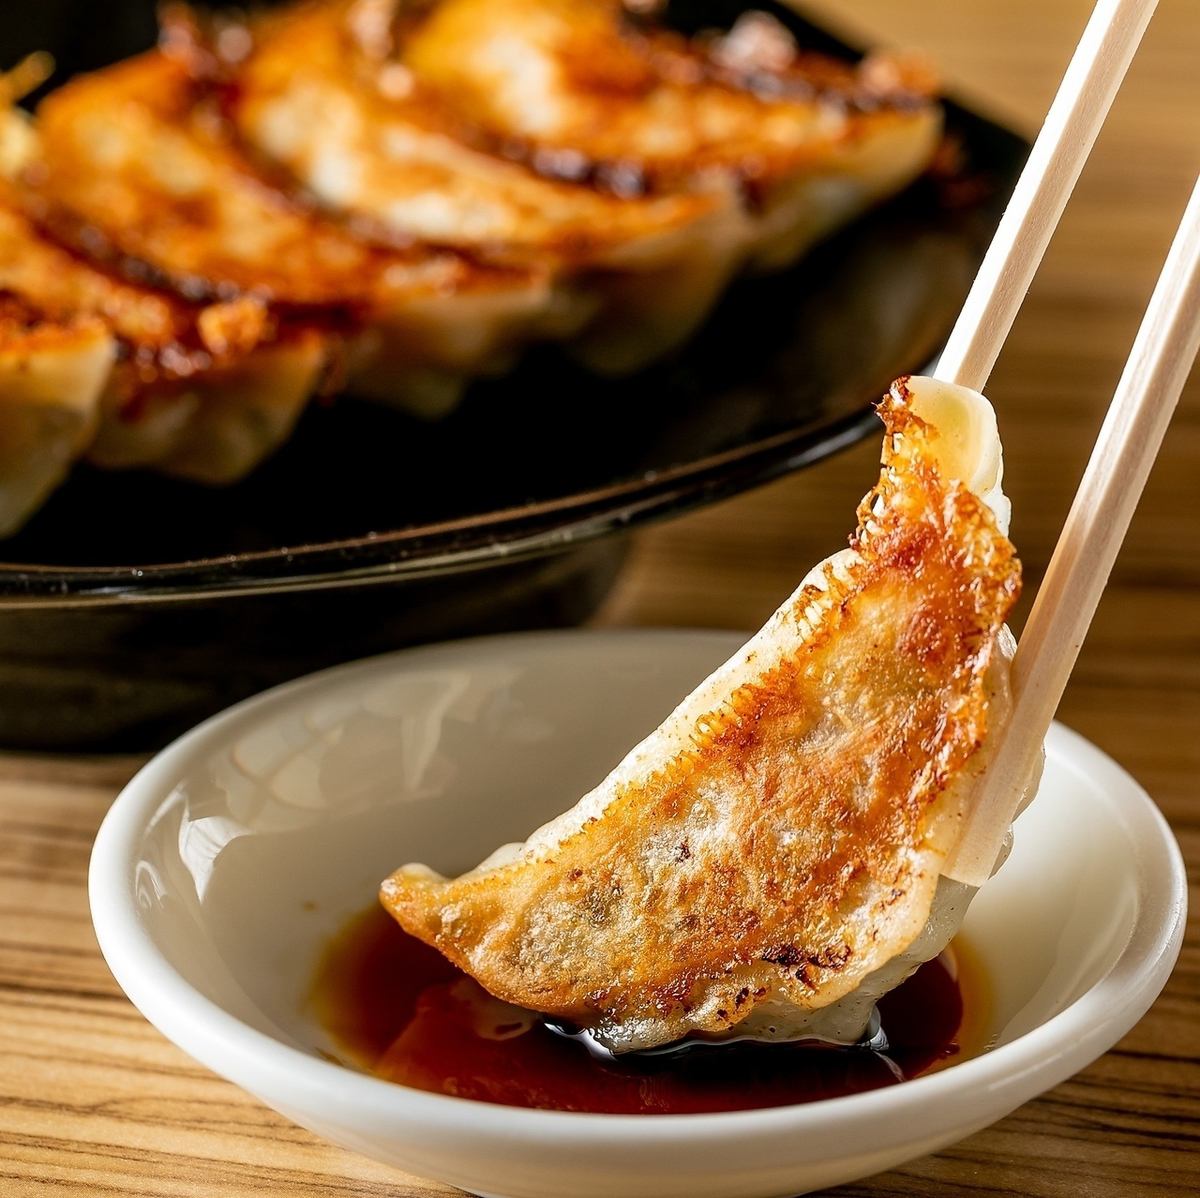 Utsunomiya gyoza specialty store♪ Our proud gravy gyoza is exquisite! You can also enjoy alcohol!